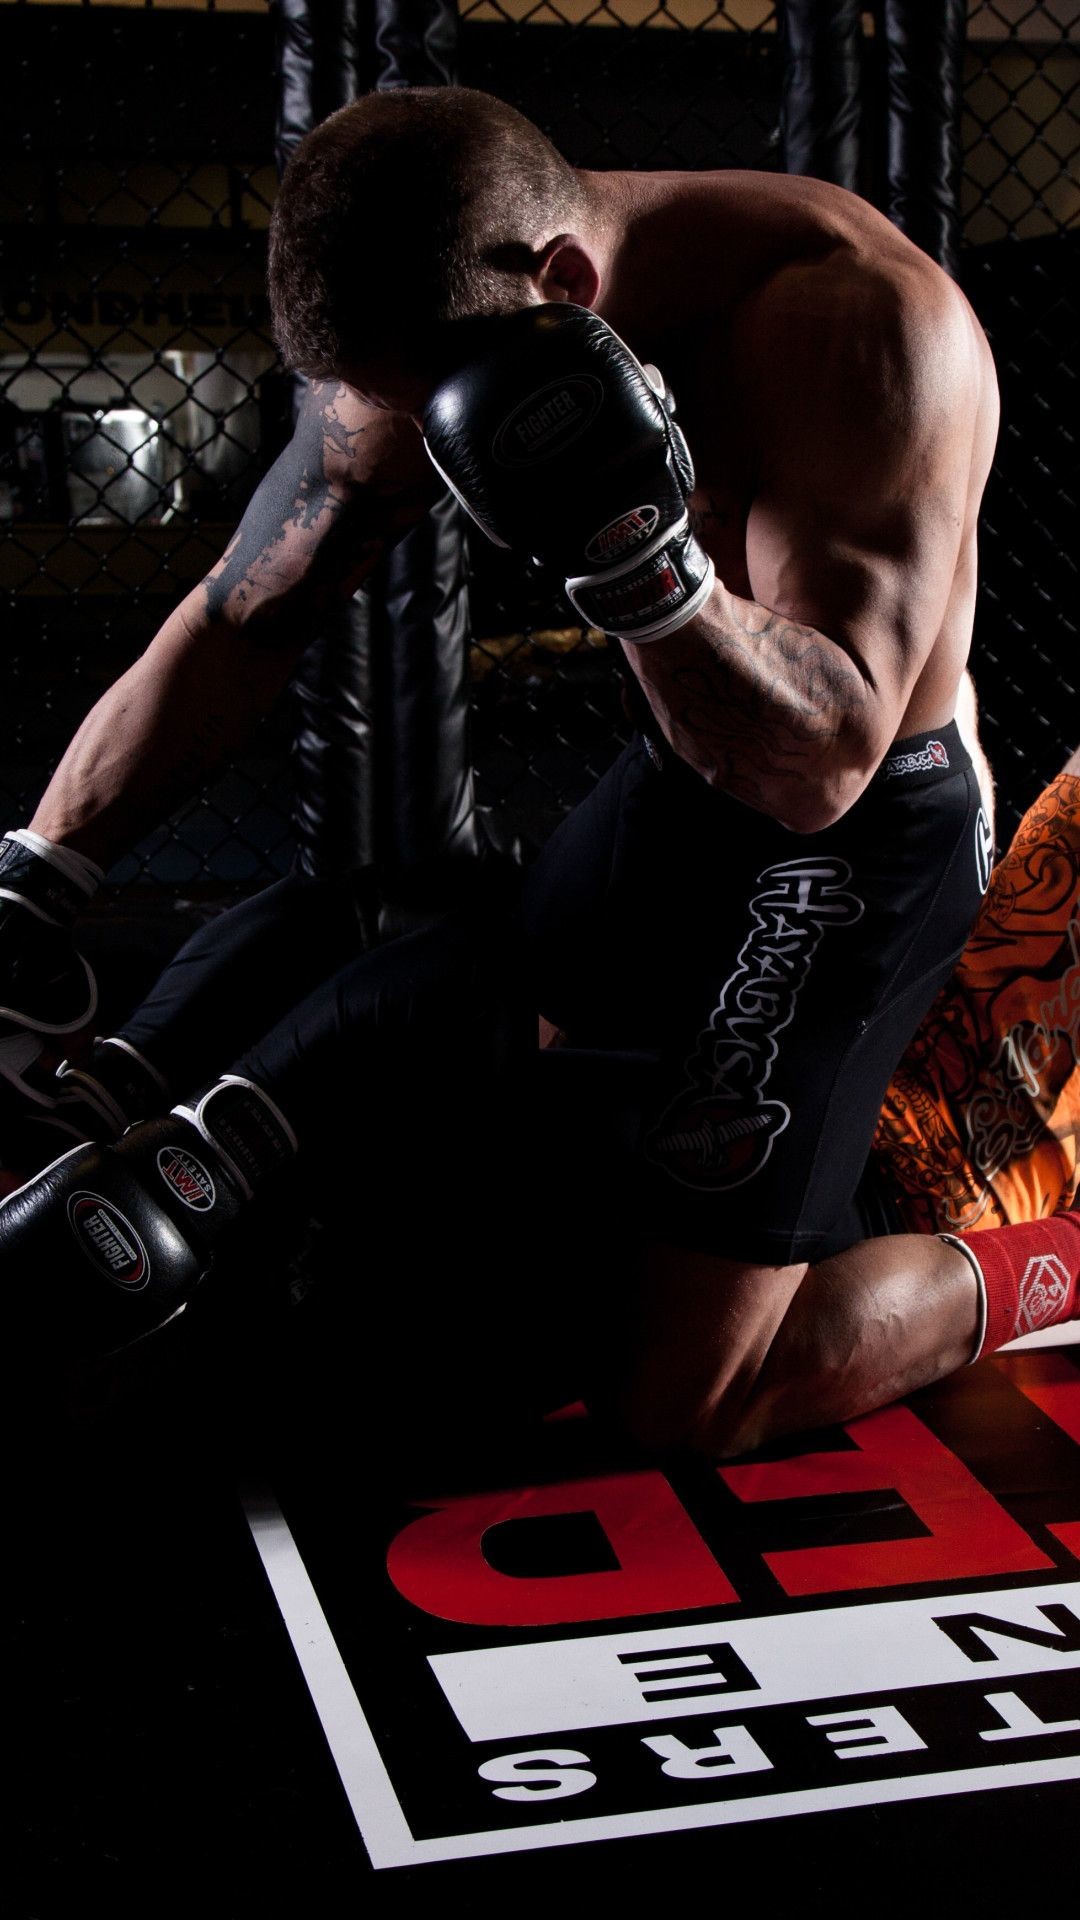 HD Mma Wallpaper (best HD Mma Wallpaper and image) on WallpaperChat